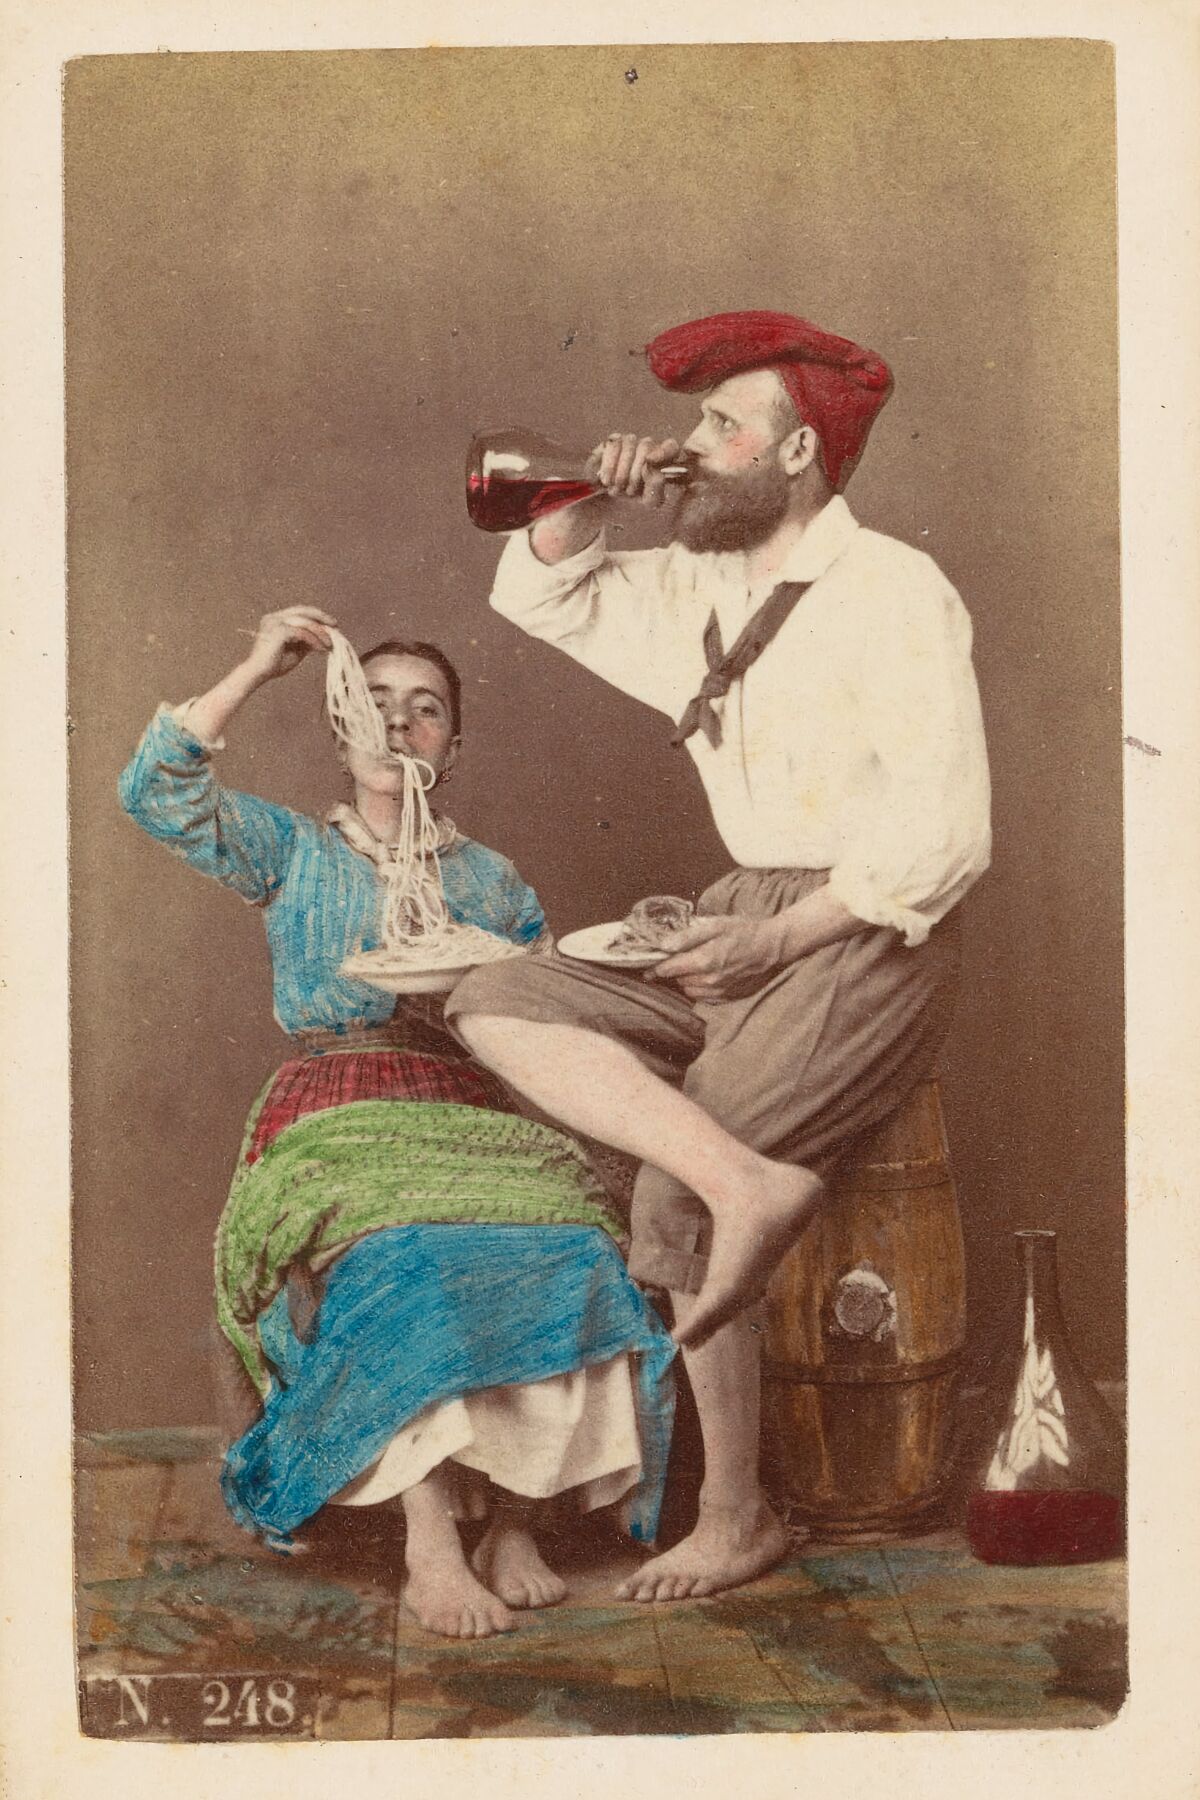 Portrait of an Unknown Man and Woman Eating Spaghetti and Drinking Wine by Giorgio Conrad - c. 1860-1880